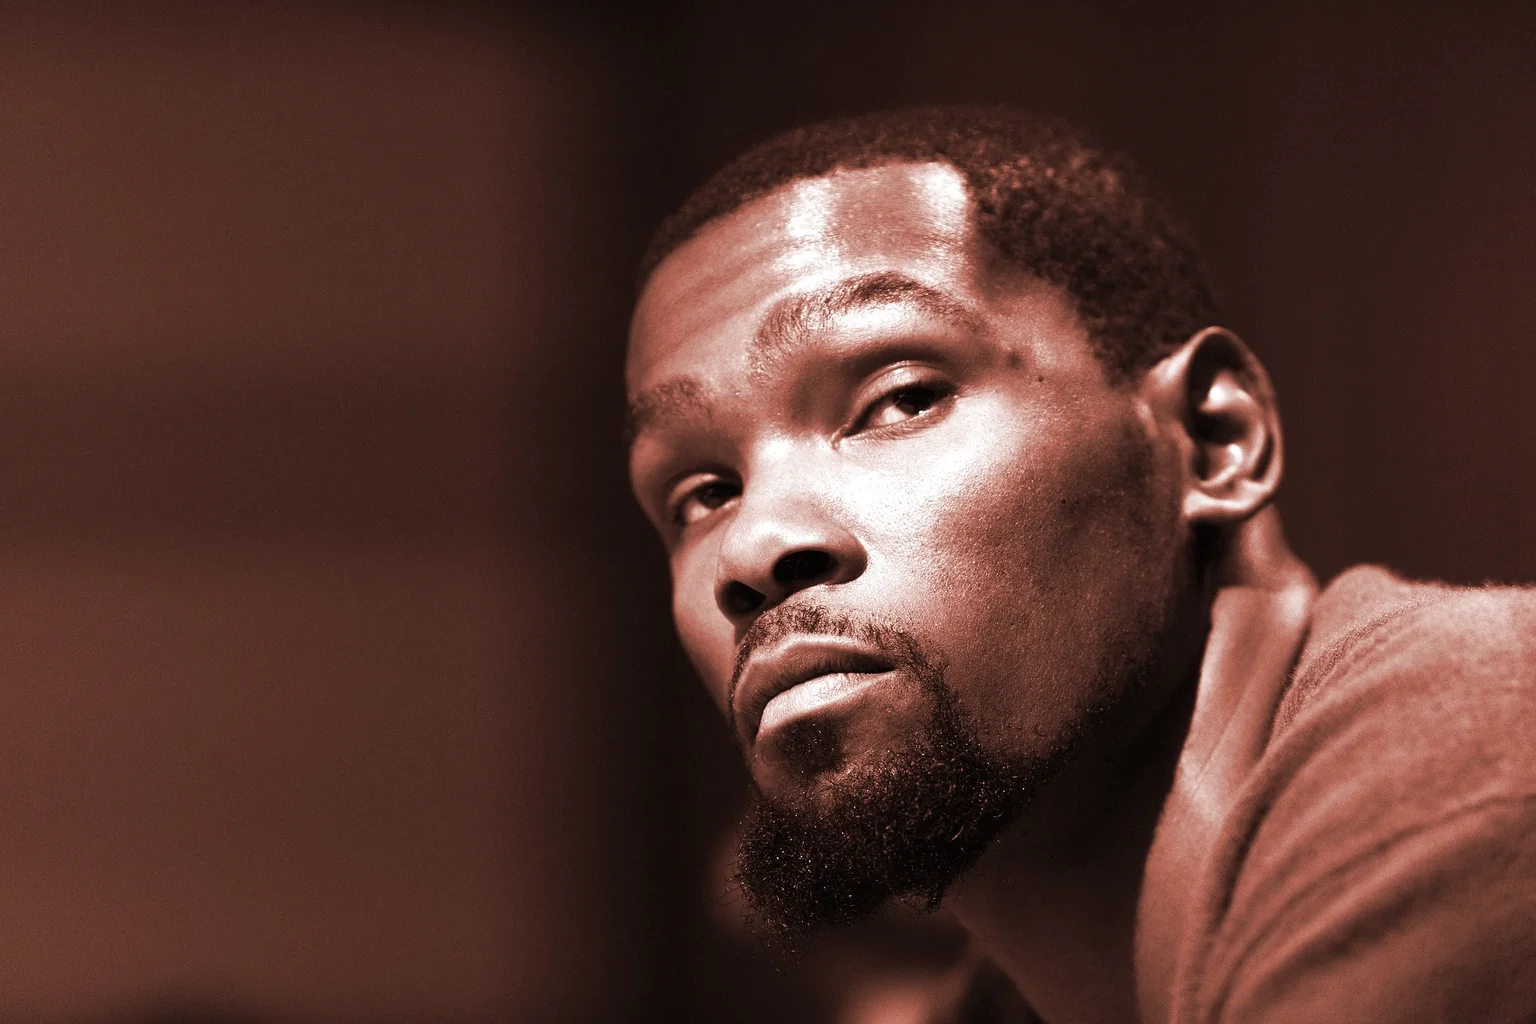 Kevin Durant in February 2018. (Photo by Mark Sebastian on Flickr, CC BY-SA 2.0)